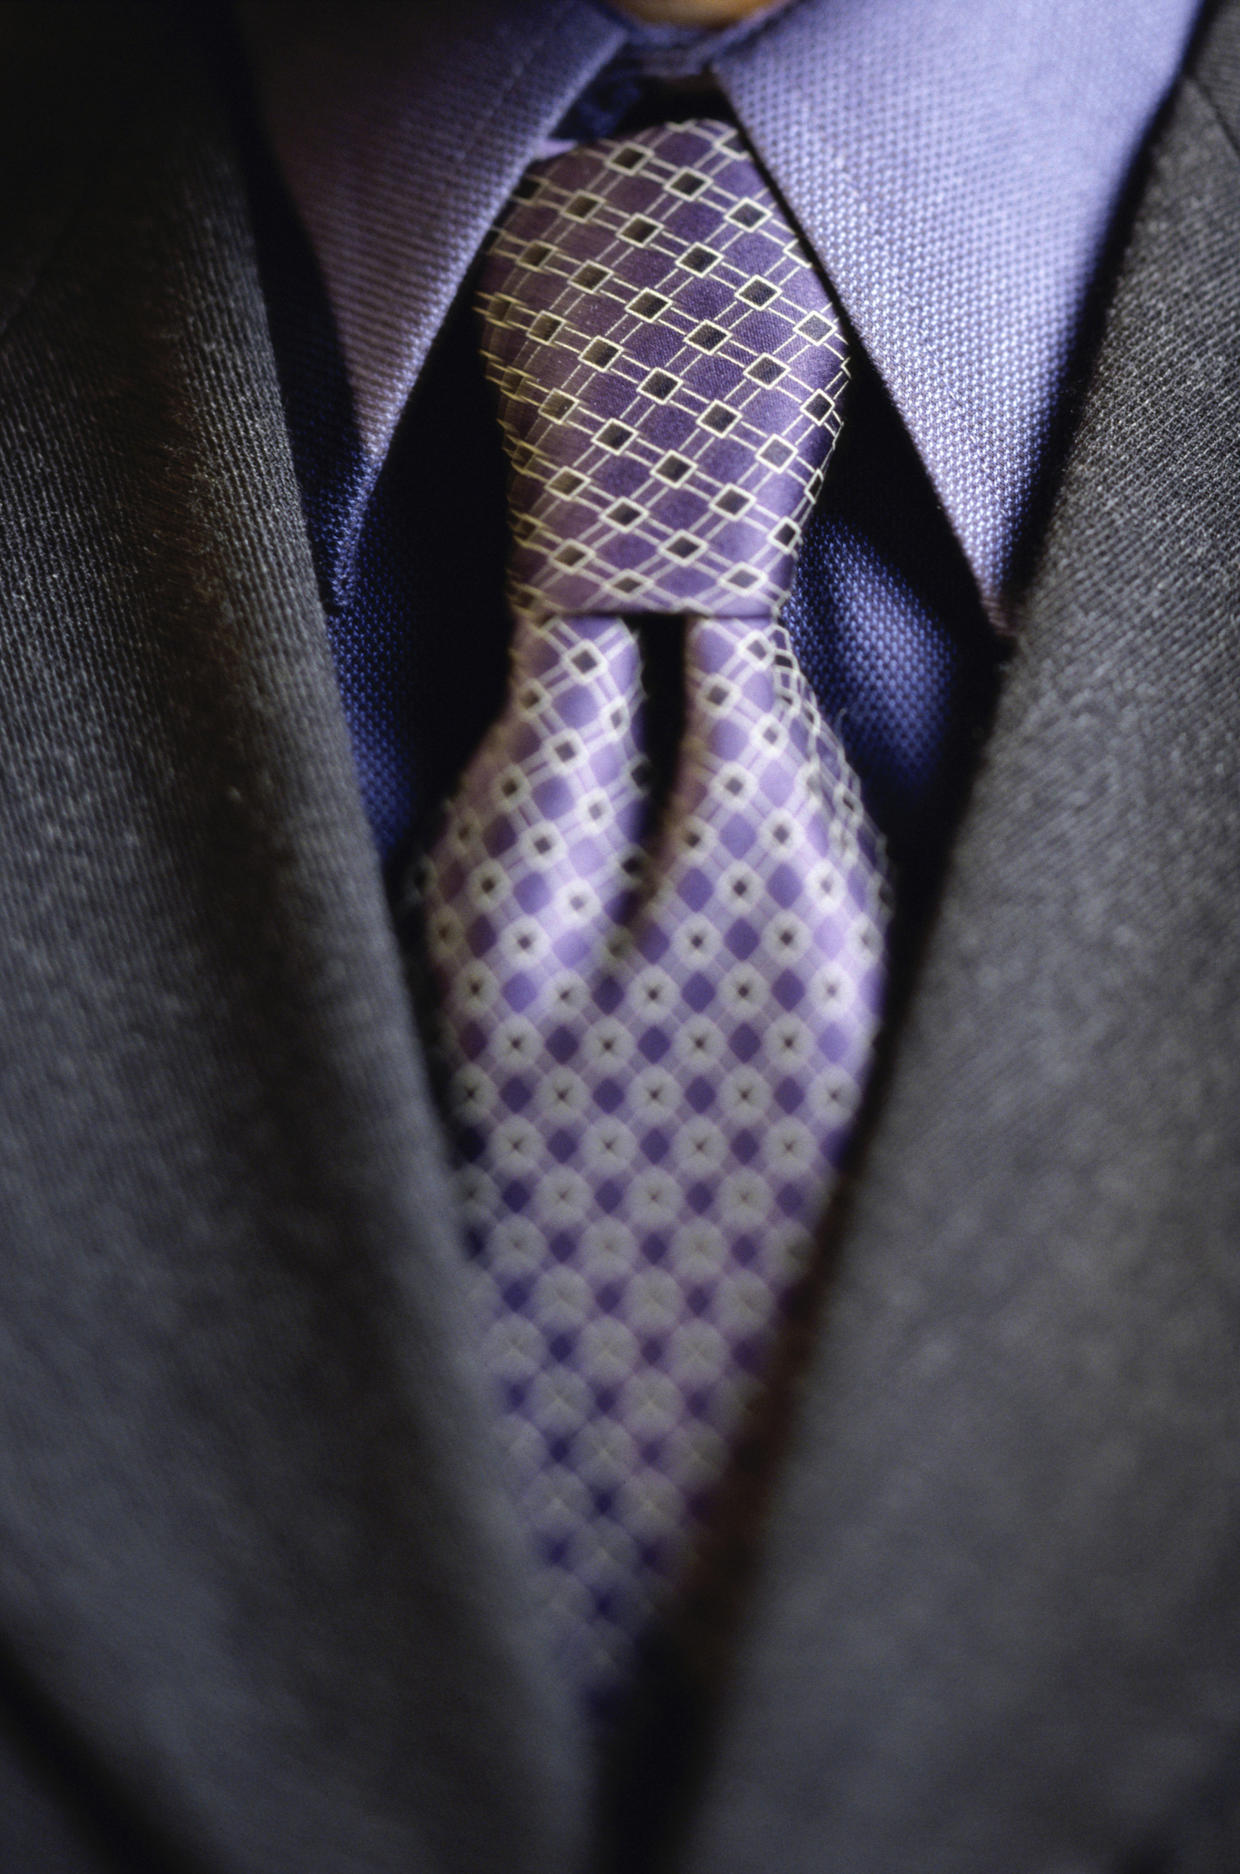 Best Places To Buy A Tailored Suit In Minnesota - CBS Minnesota